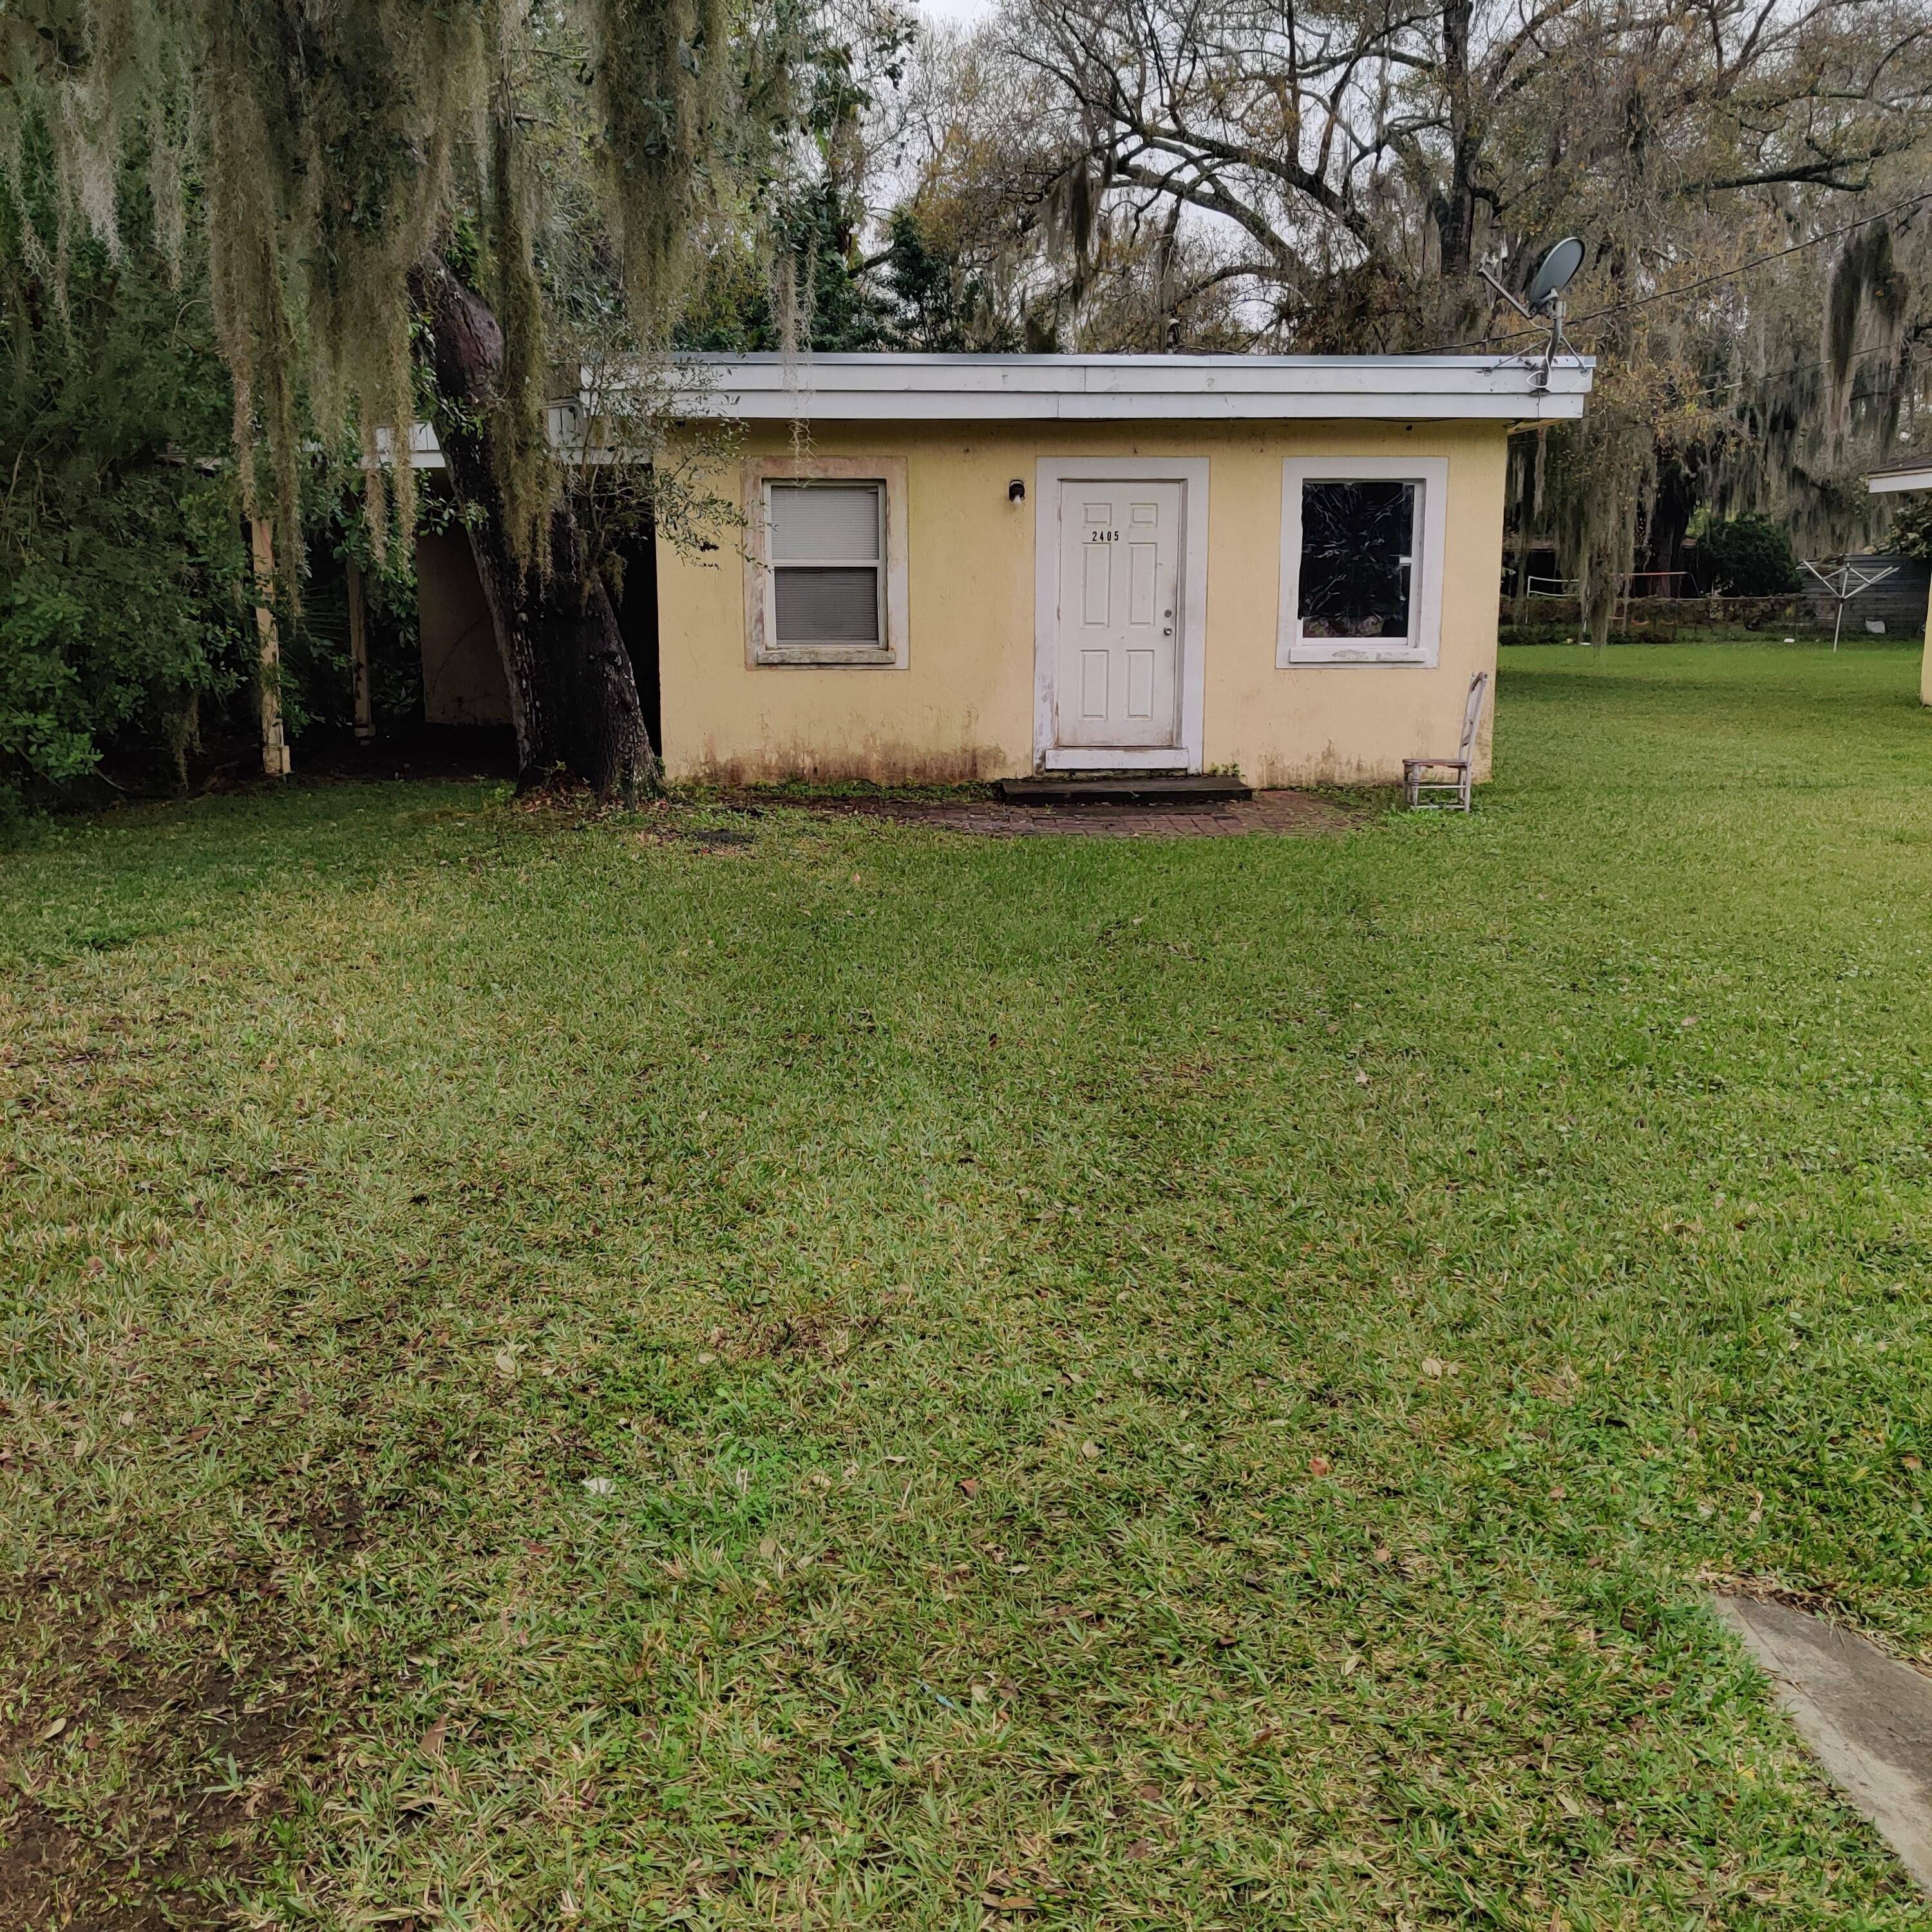 Great opportunity to own an income producing home with old Florida charm.